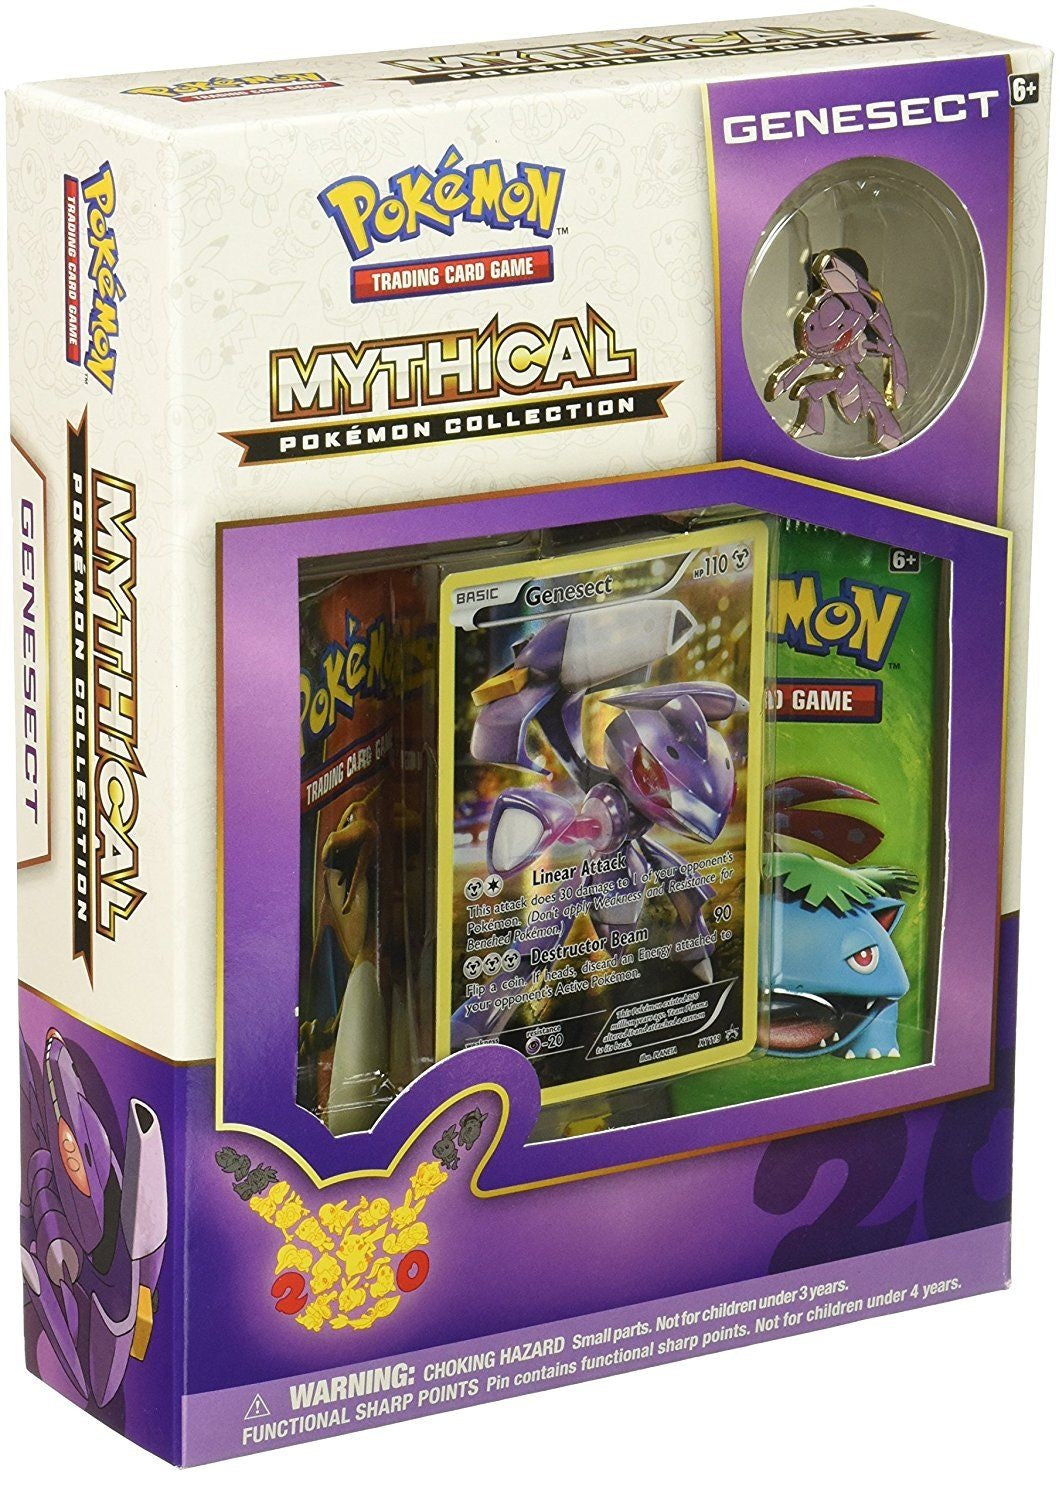 SUPER LIMITED!!! 2016 POKEMON GENERATIONS MYTHICAL COLLECTION BOX (20TH ANNIVERSARY)